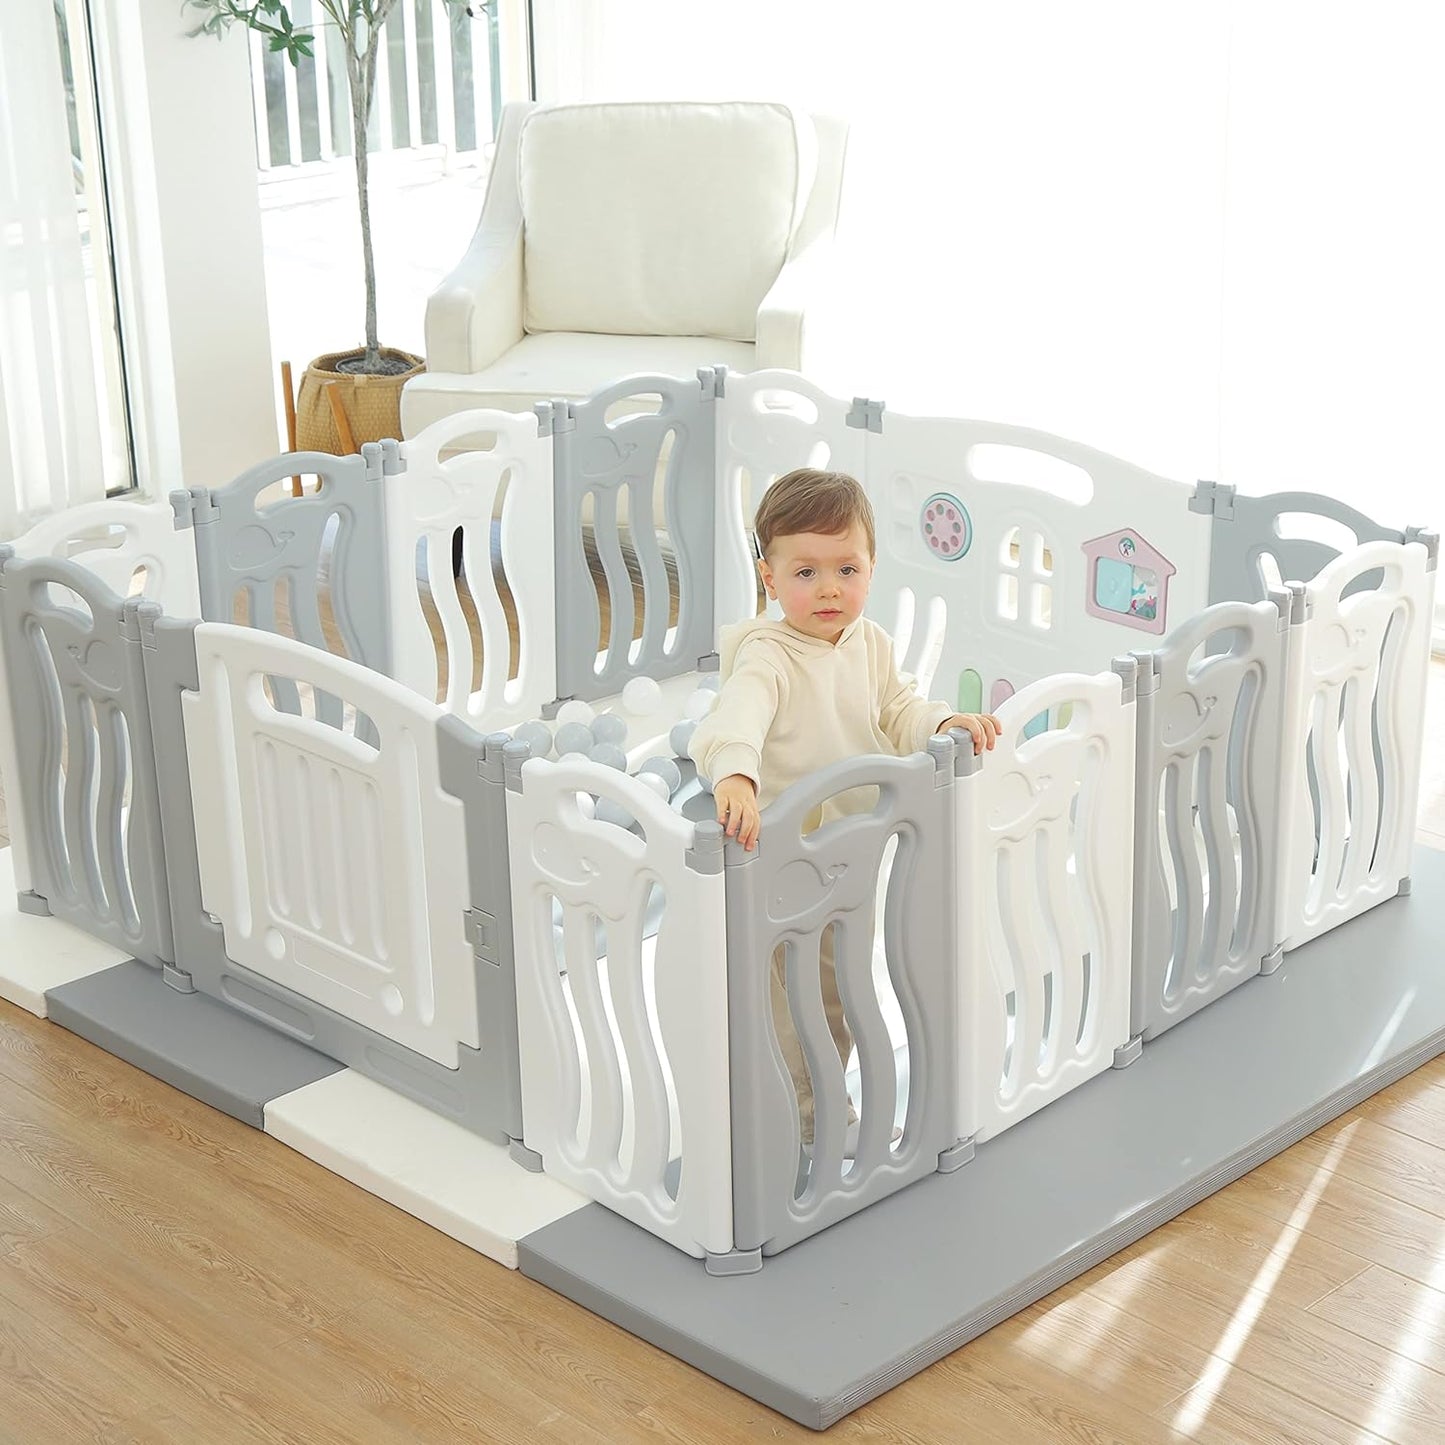 Foldable baby playpen baby folding play pen home indoor outdoor new fence